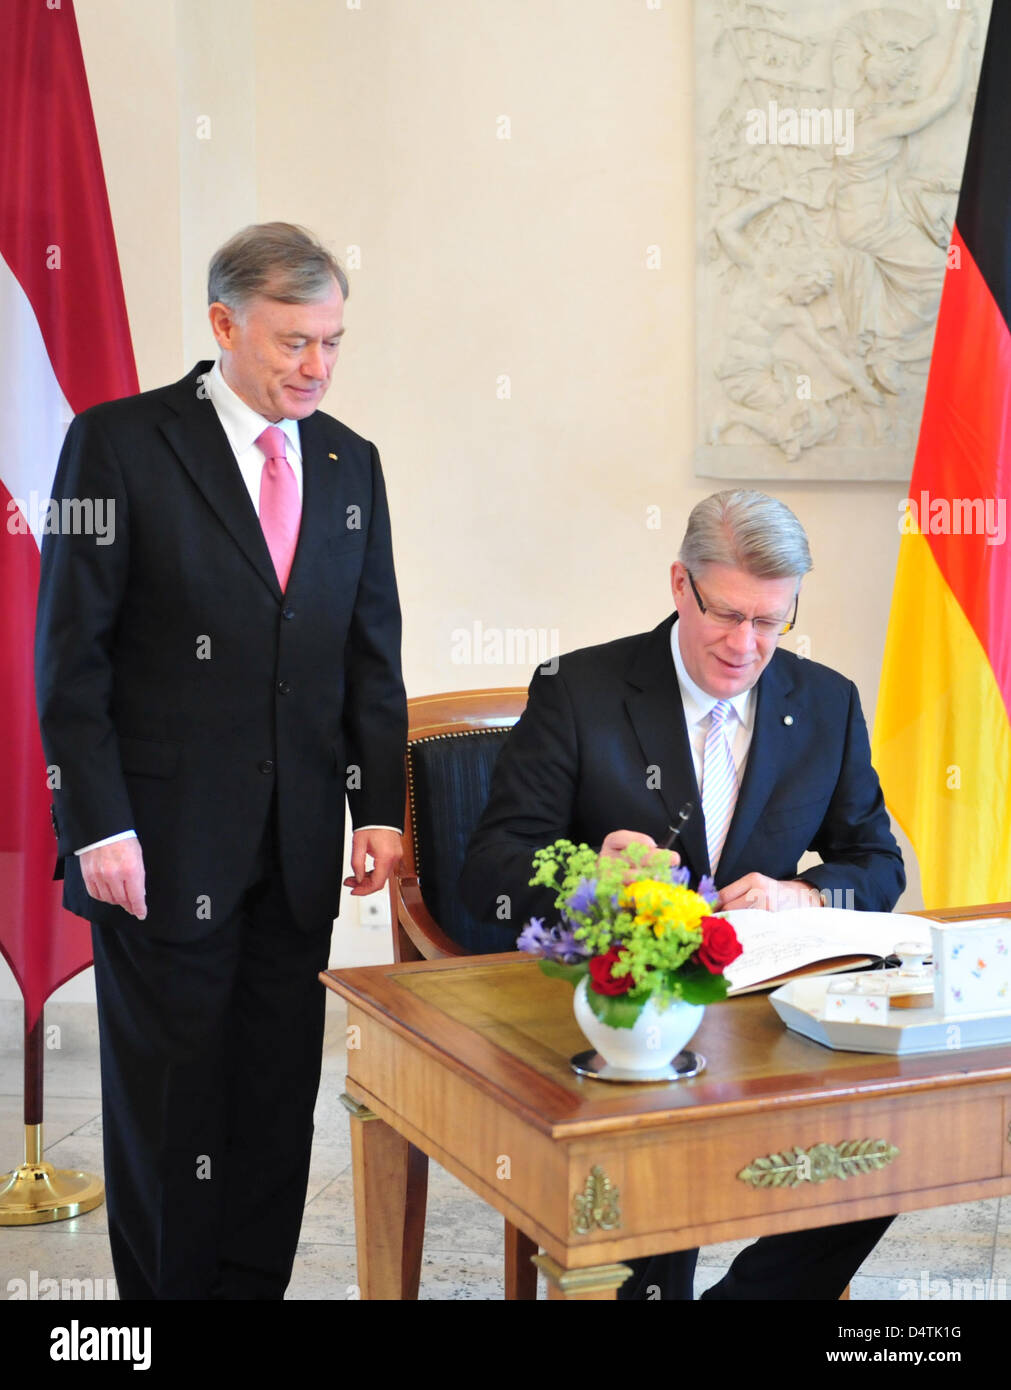 Latvian President Valdis Zatlers (R) signs the guestbook next to German President Horst Koehler at Bellevue Palace in Berlin, Germany, 10 November 2009. Zatlers is in Germany for an official state visit. Photo: KLAUS-DIETMAR GABBERT Stock Photo